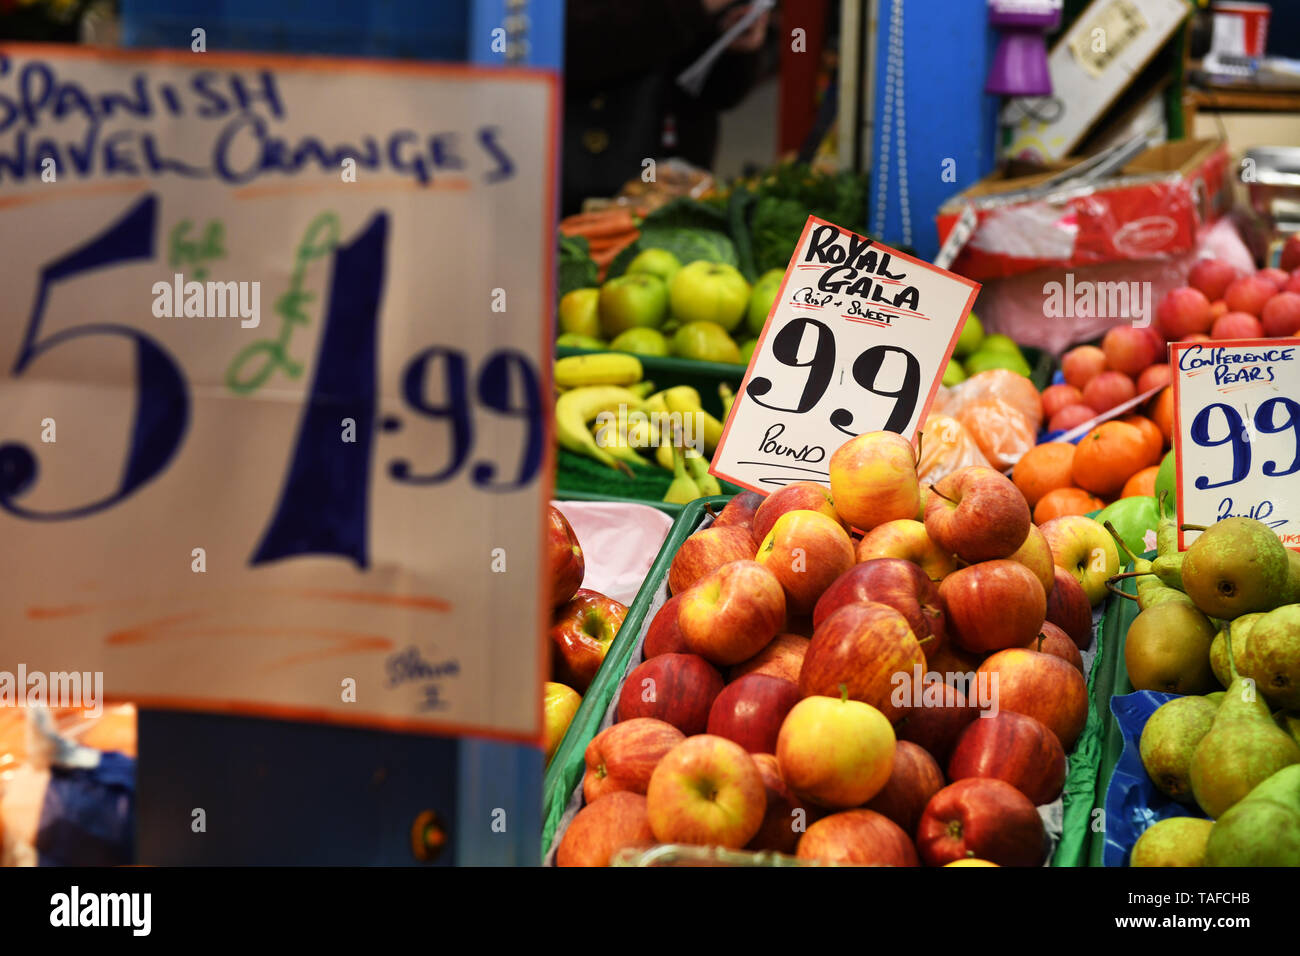 Fruit on sale at a market stall with price tags Stock Photo